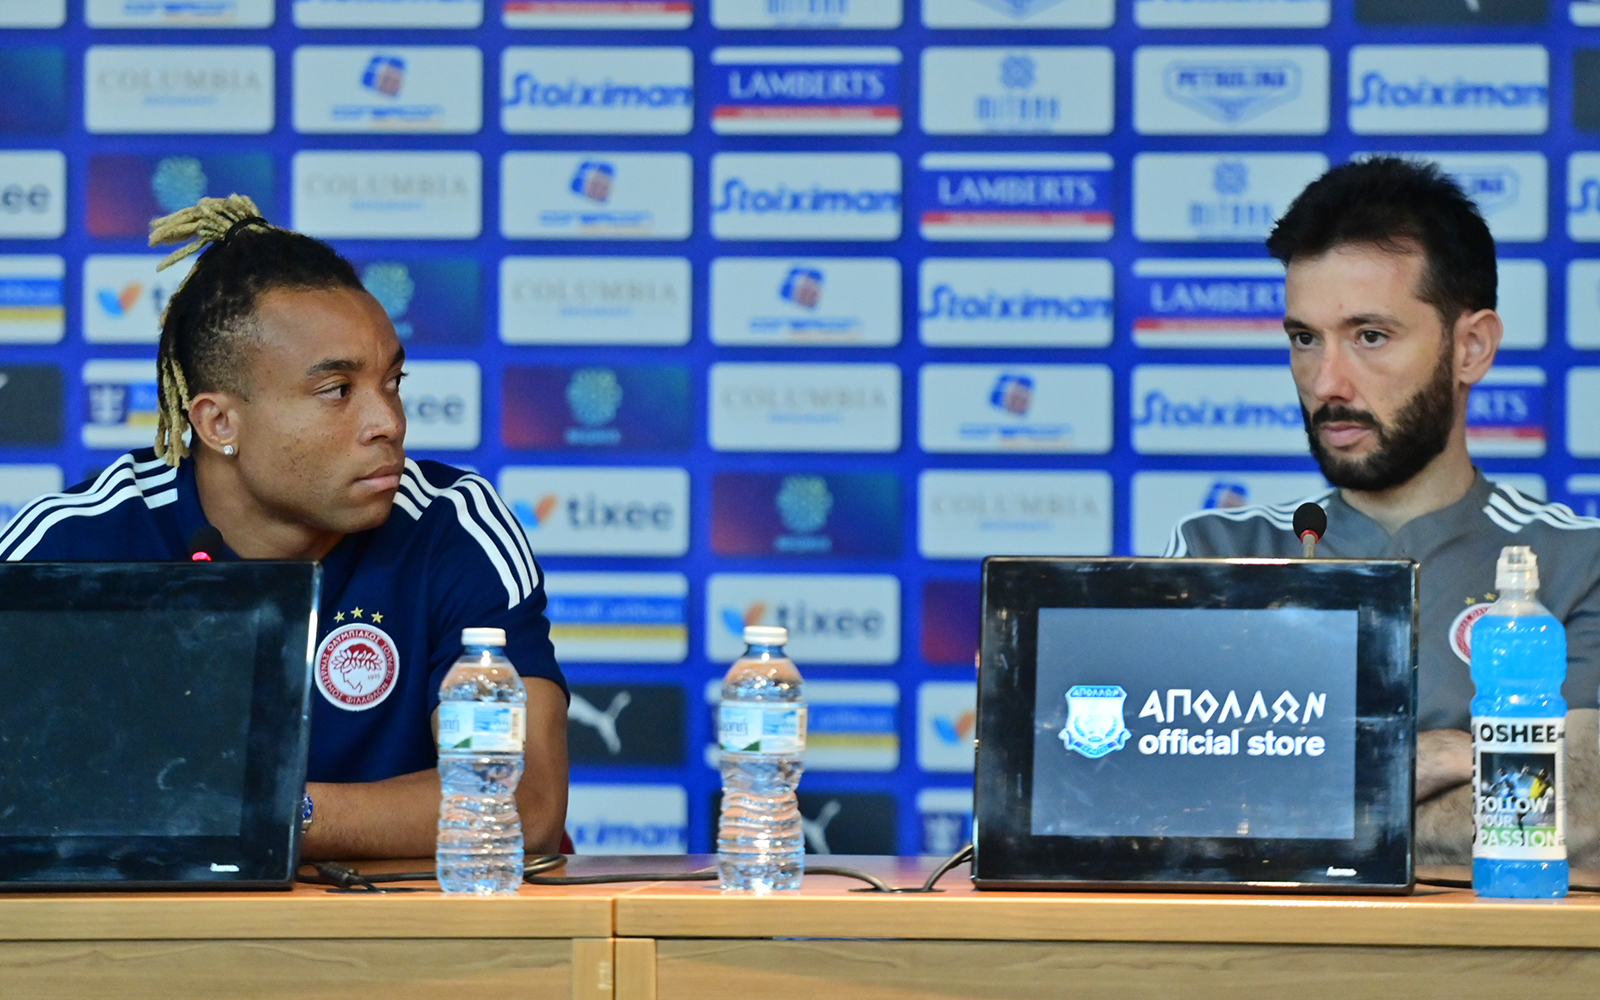 Pre-match press conference ahead of the Apollon Limassol-Olympiacos match